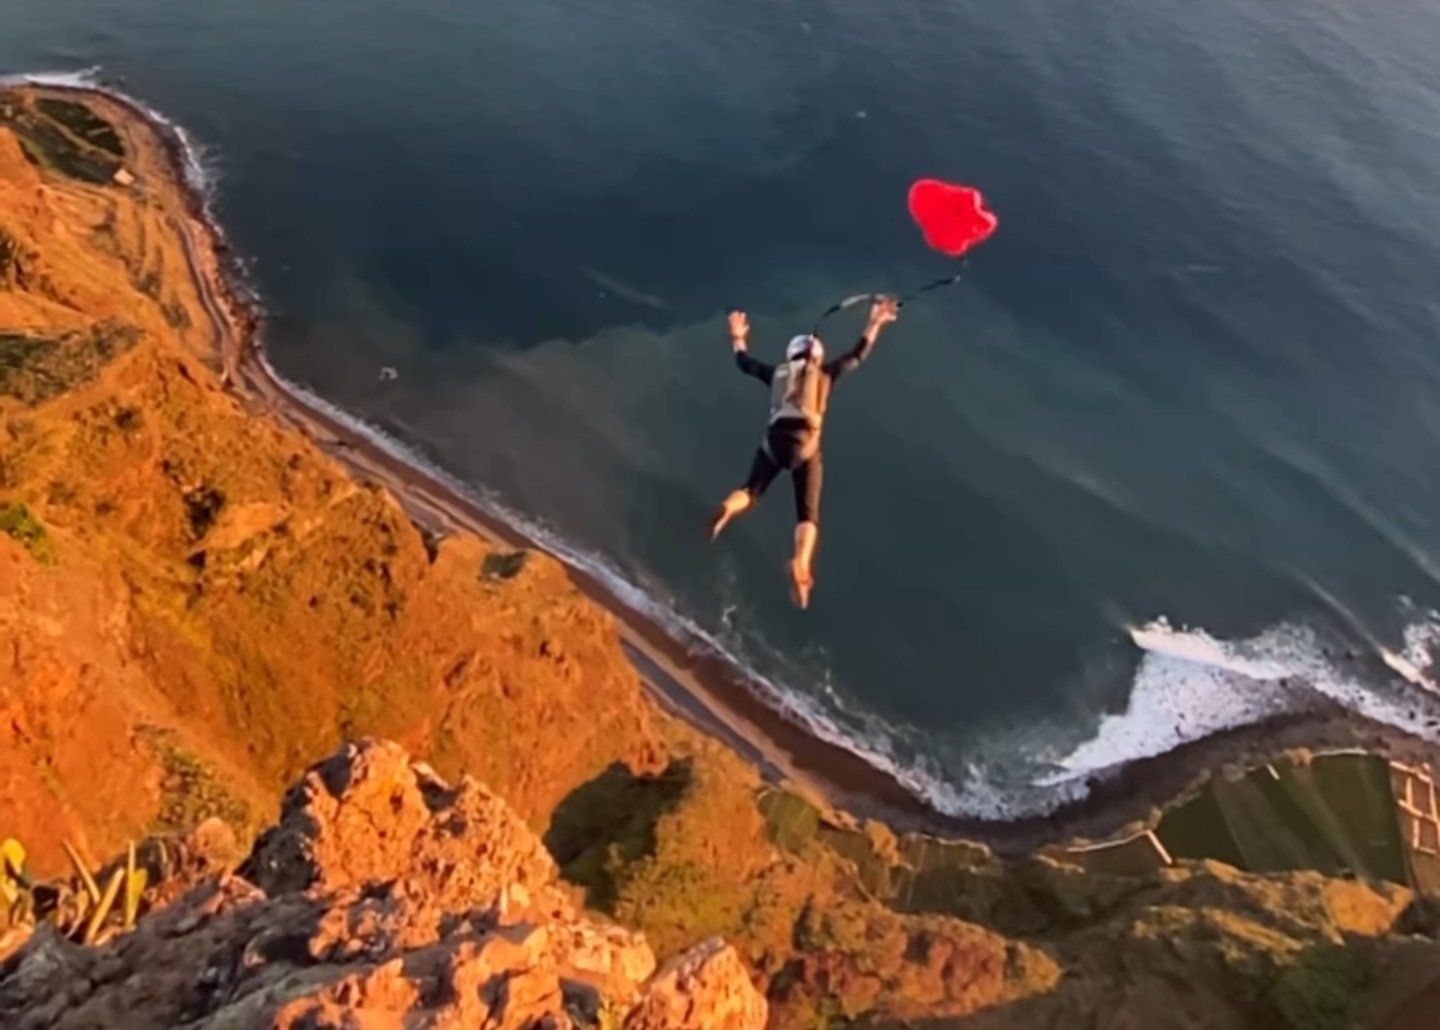 See the Video of the Red Bull Skydivers jumping from Cabo Girão